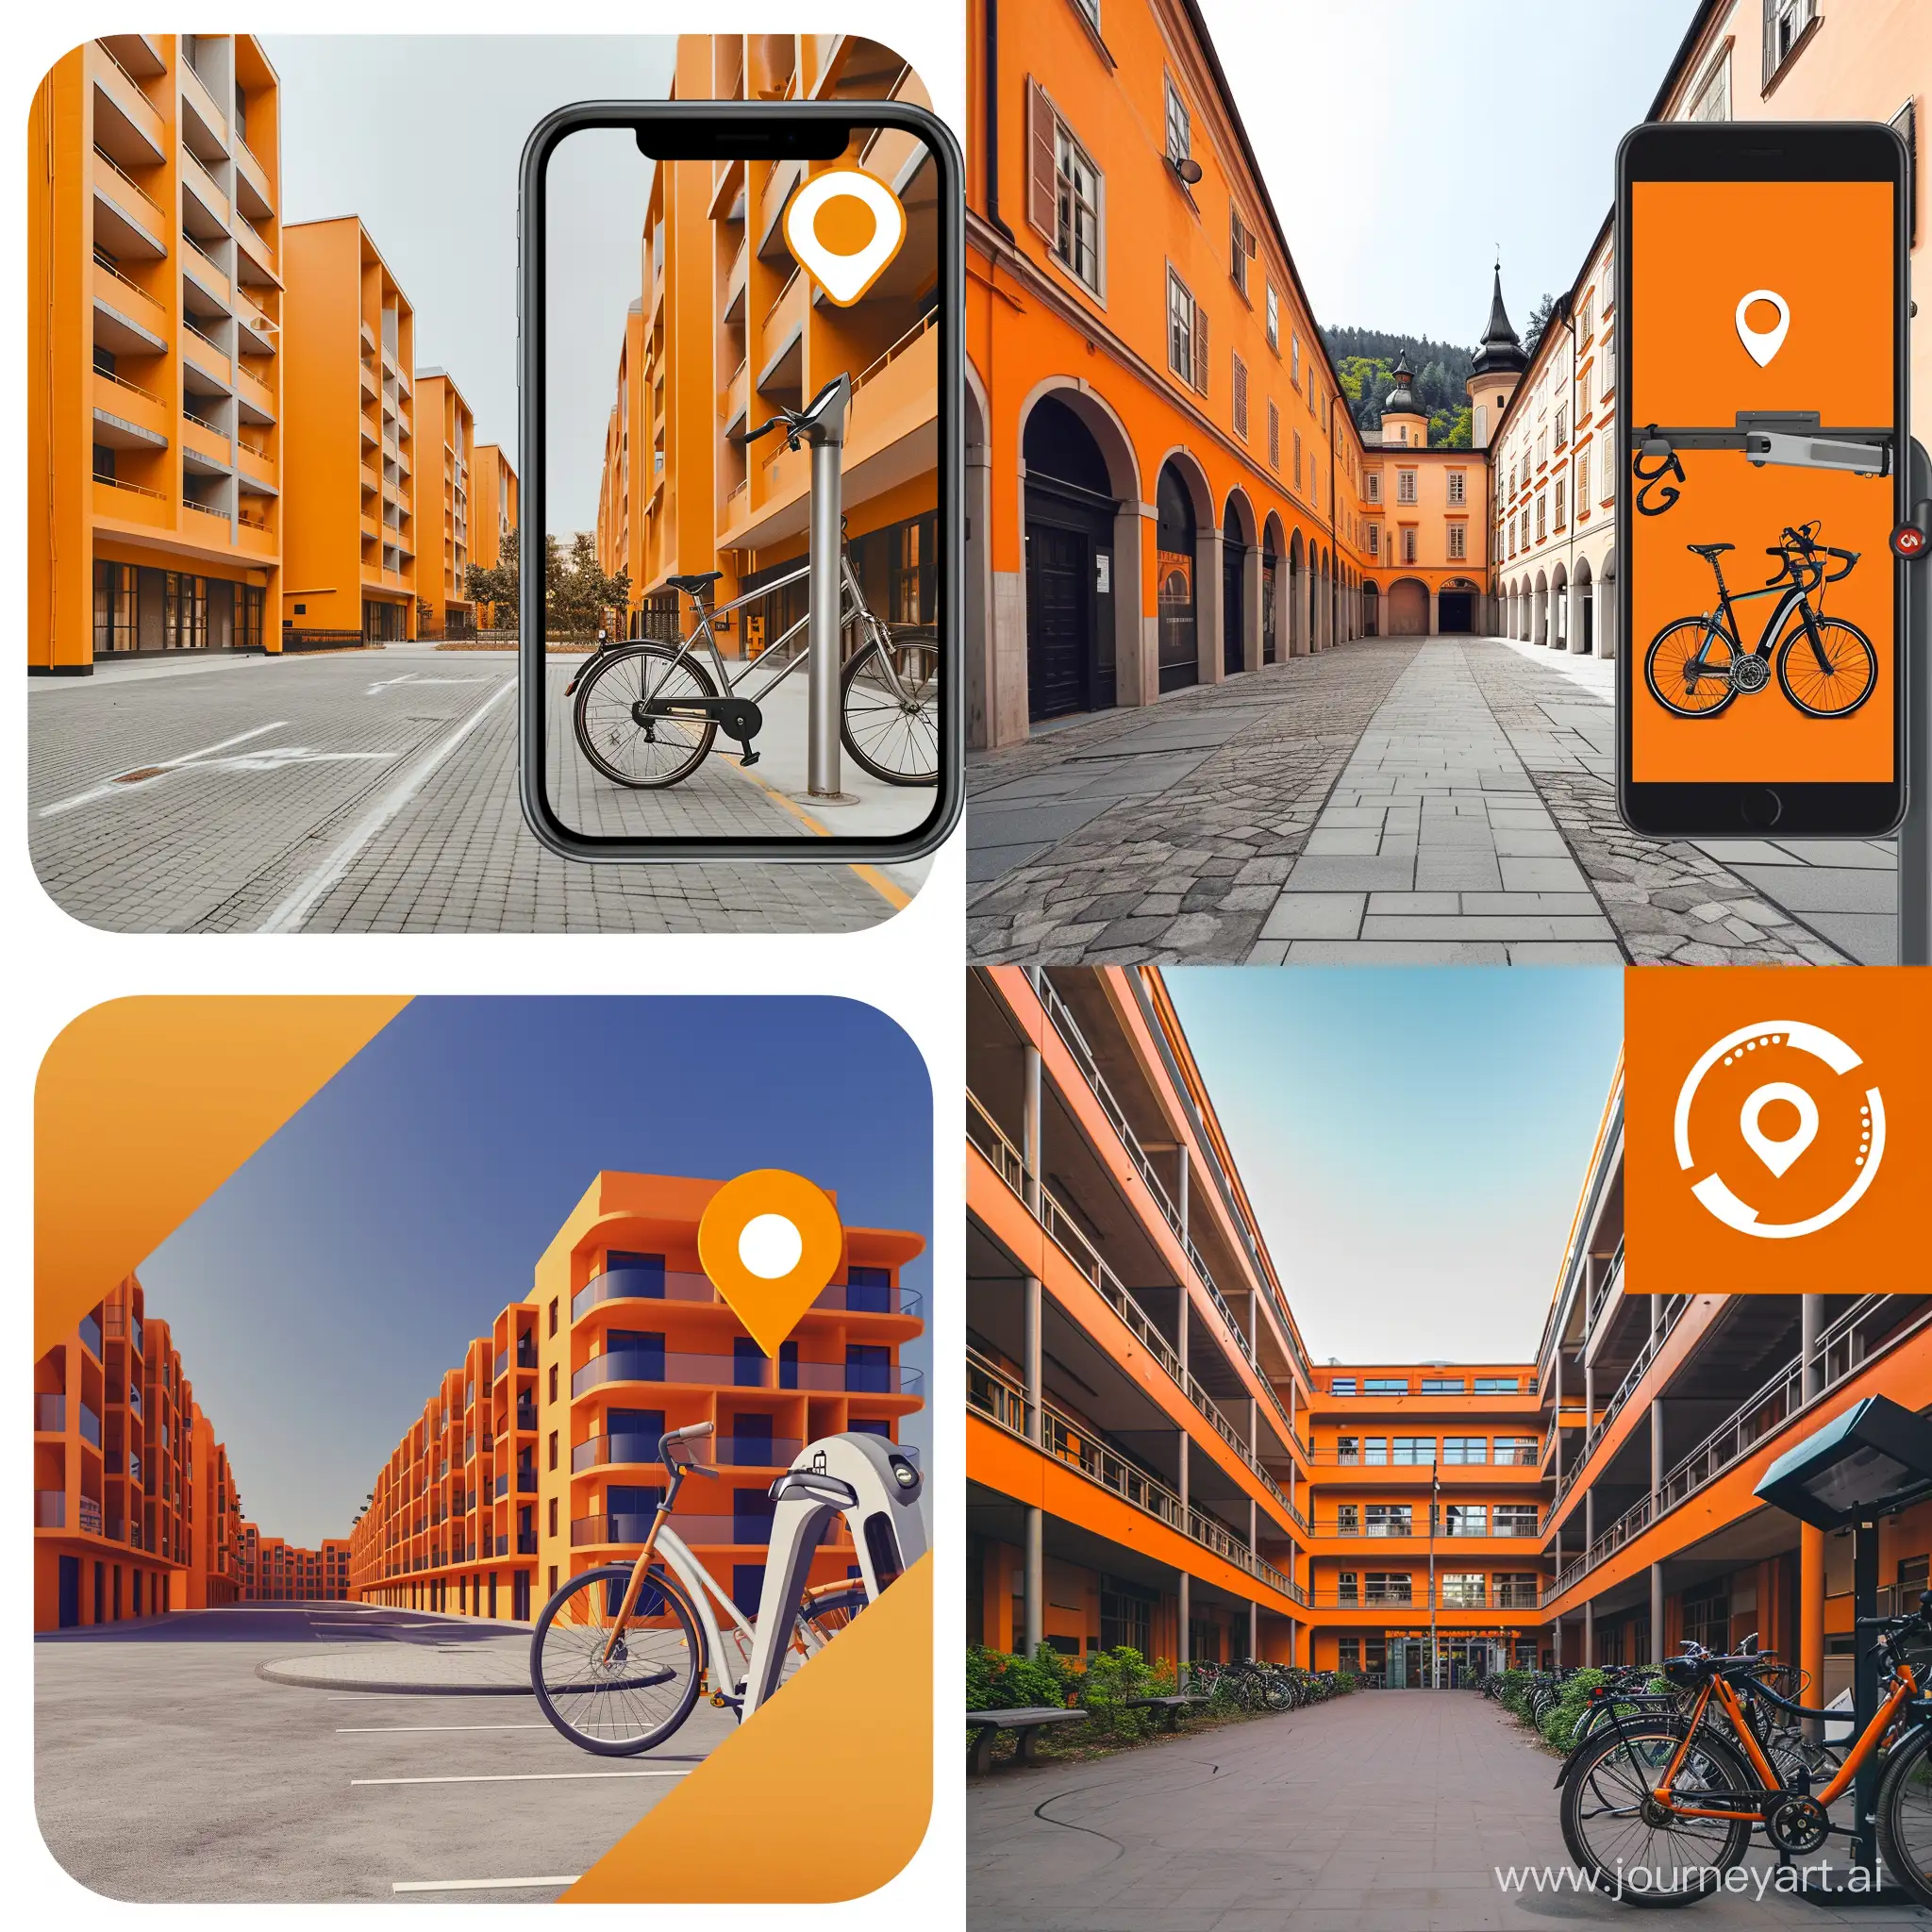 A bike rental station inside the university on the right side of the mobile image with the location icon and the wide and tall orange buildings and high-altitude image